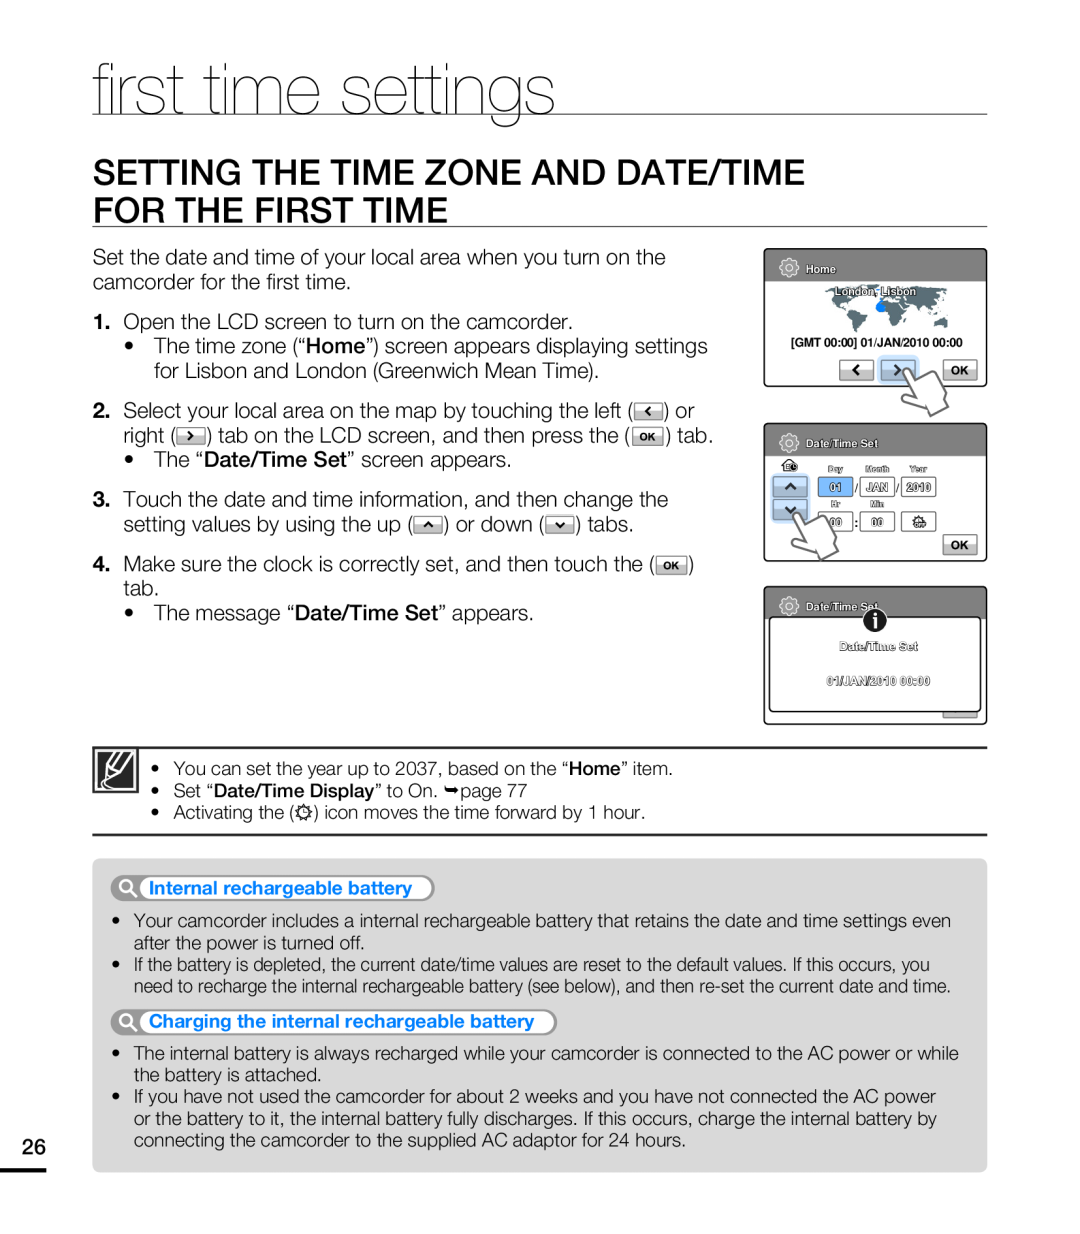 Samsung HMX-T10BP/XIL, HMX-T10WP/EDC manual ﬁ rst time settings, Setting The Time Zone And Date/Time For The First Time 